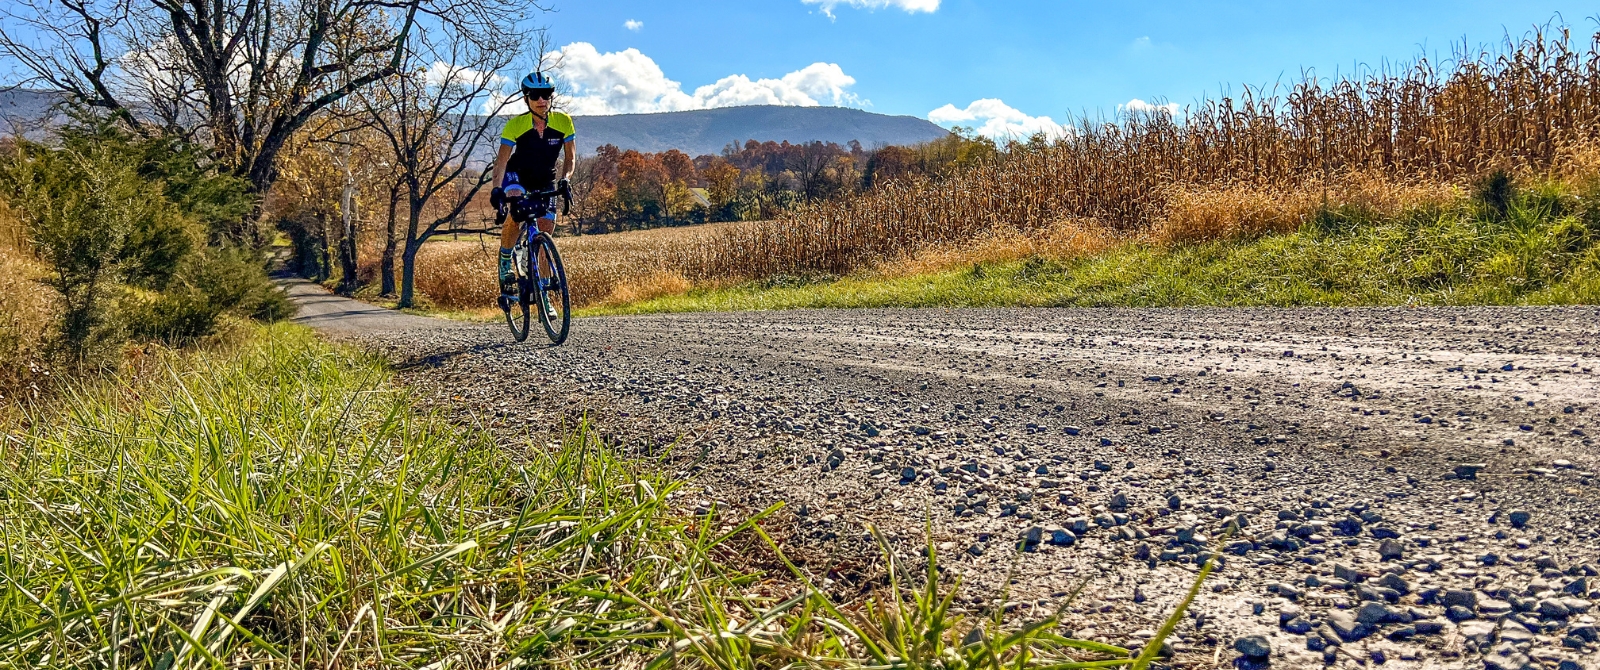 Get acquainted with the Shenandoah Valley